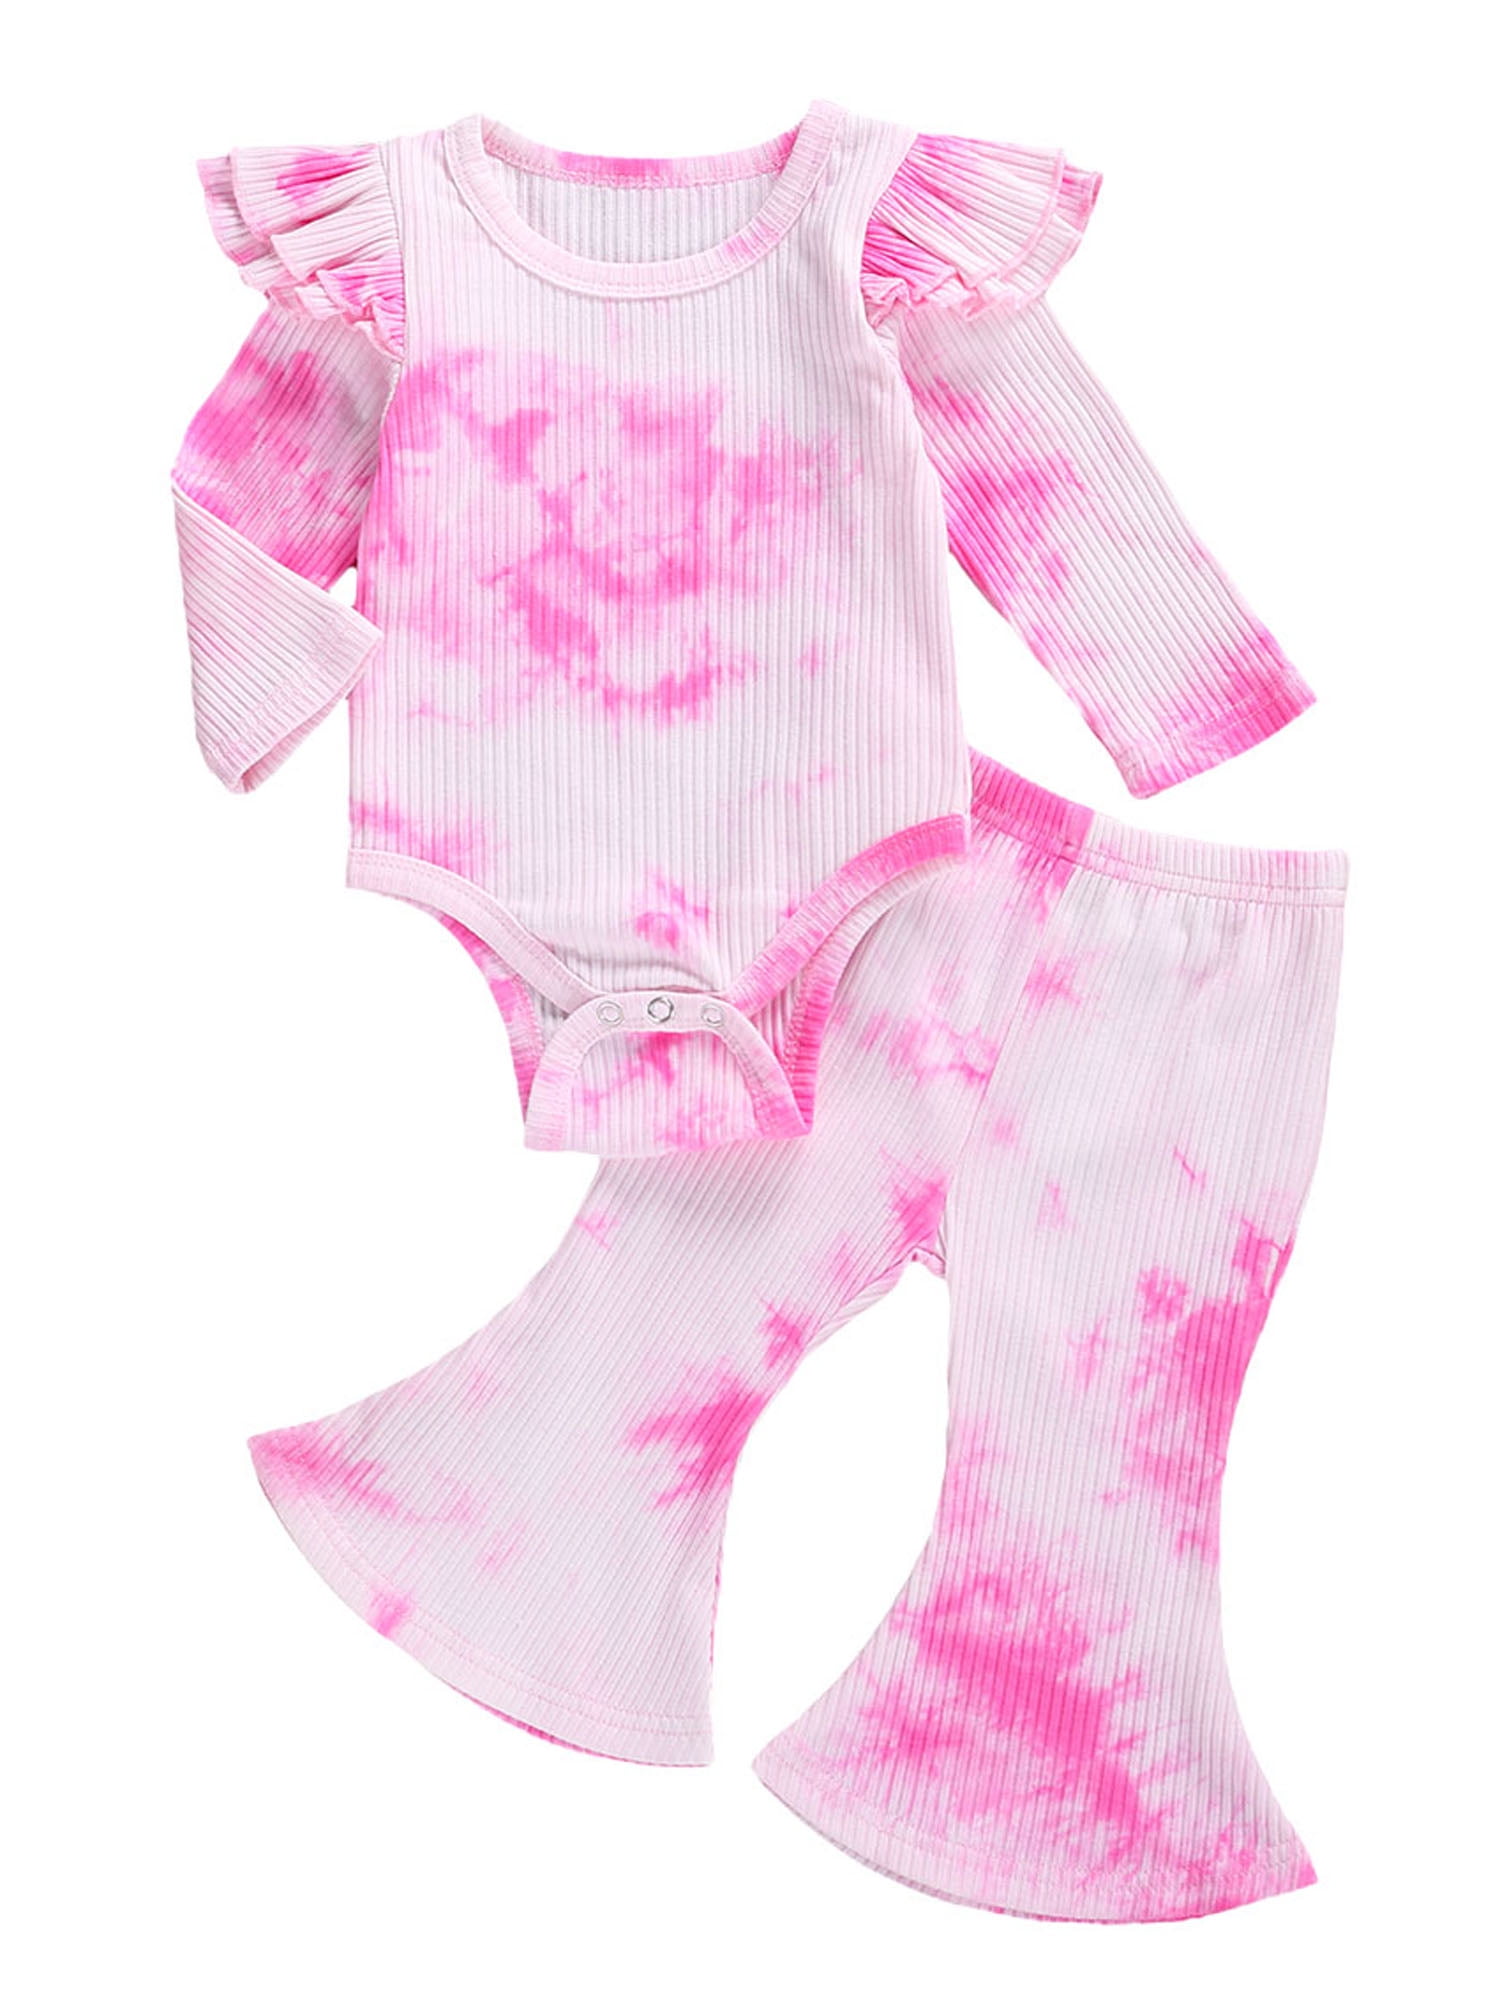 Newborn Infant Baby Boy Girl Long Sleeve Tie Dye Romper Bodysuit Jumpsuit+Pants Two Piece Outfit Set Fall Winter Clothes